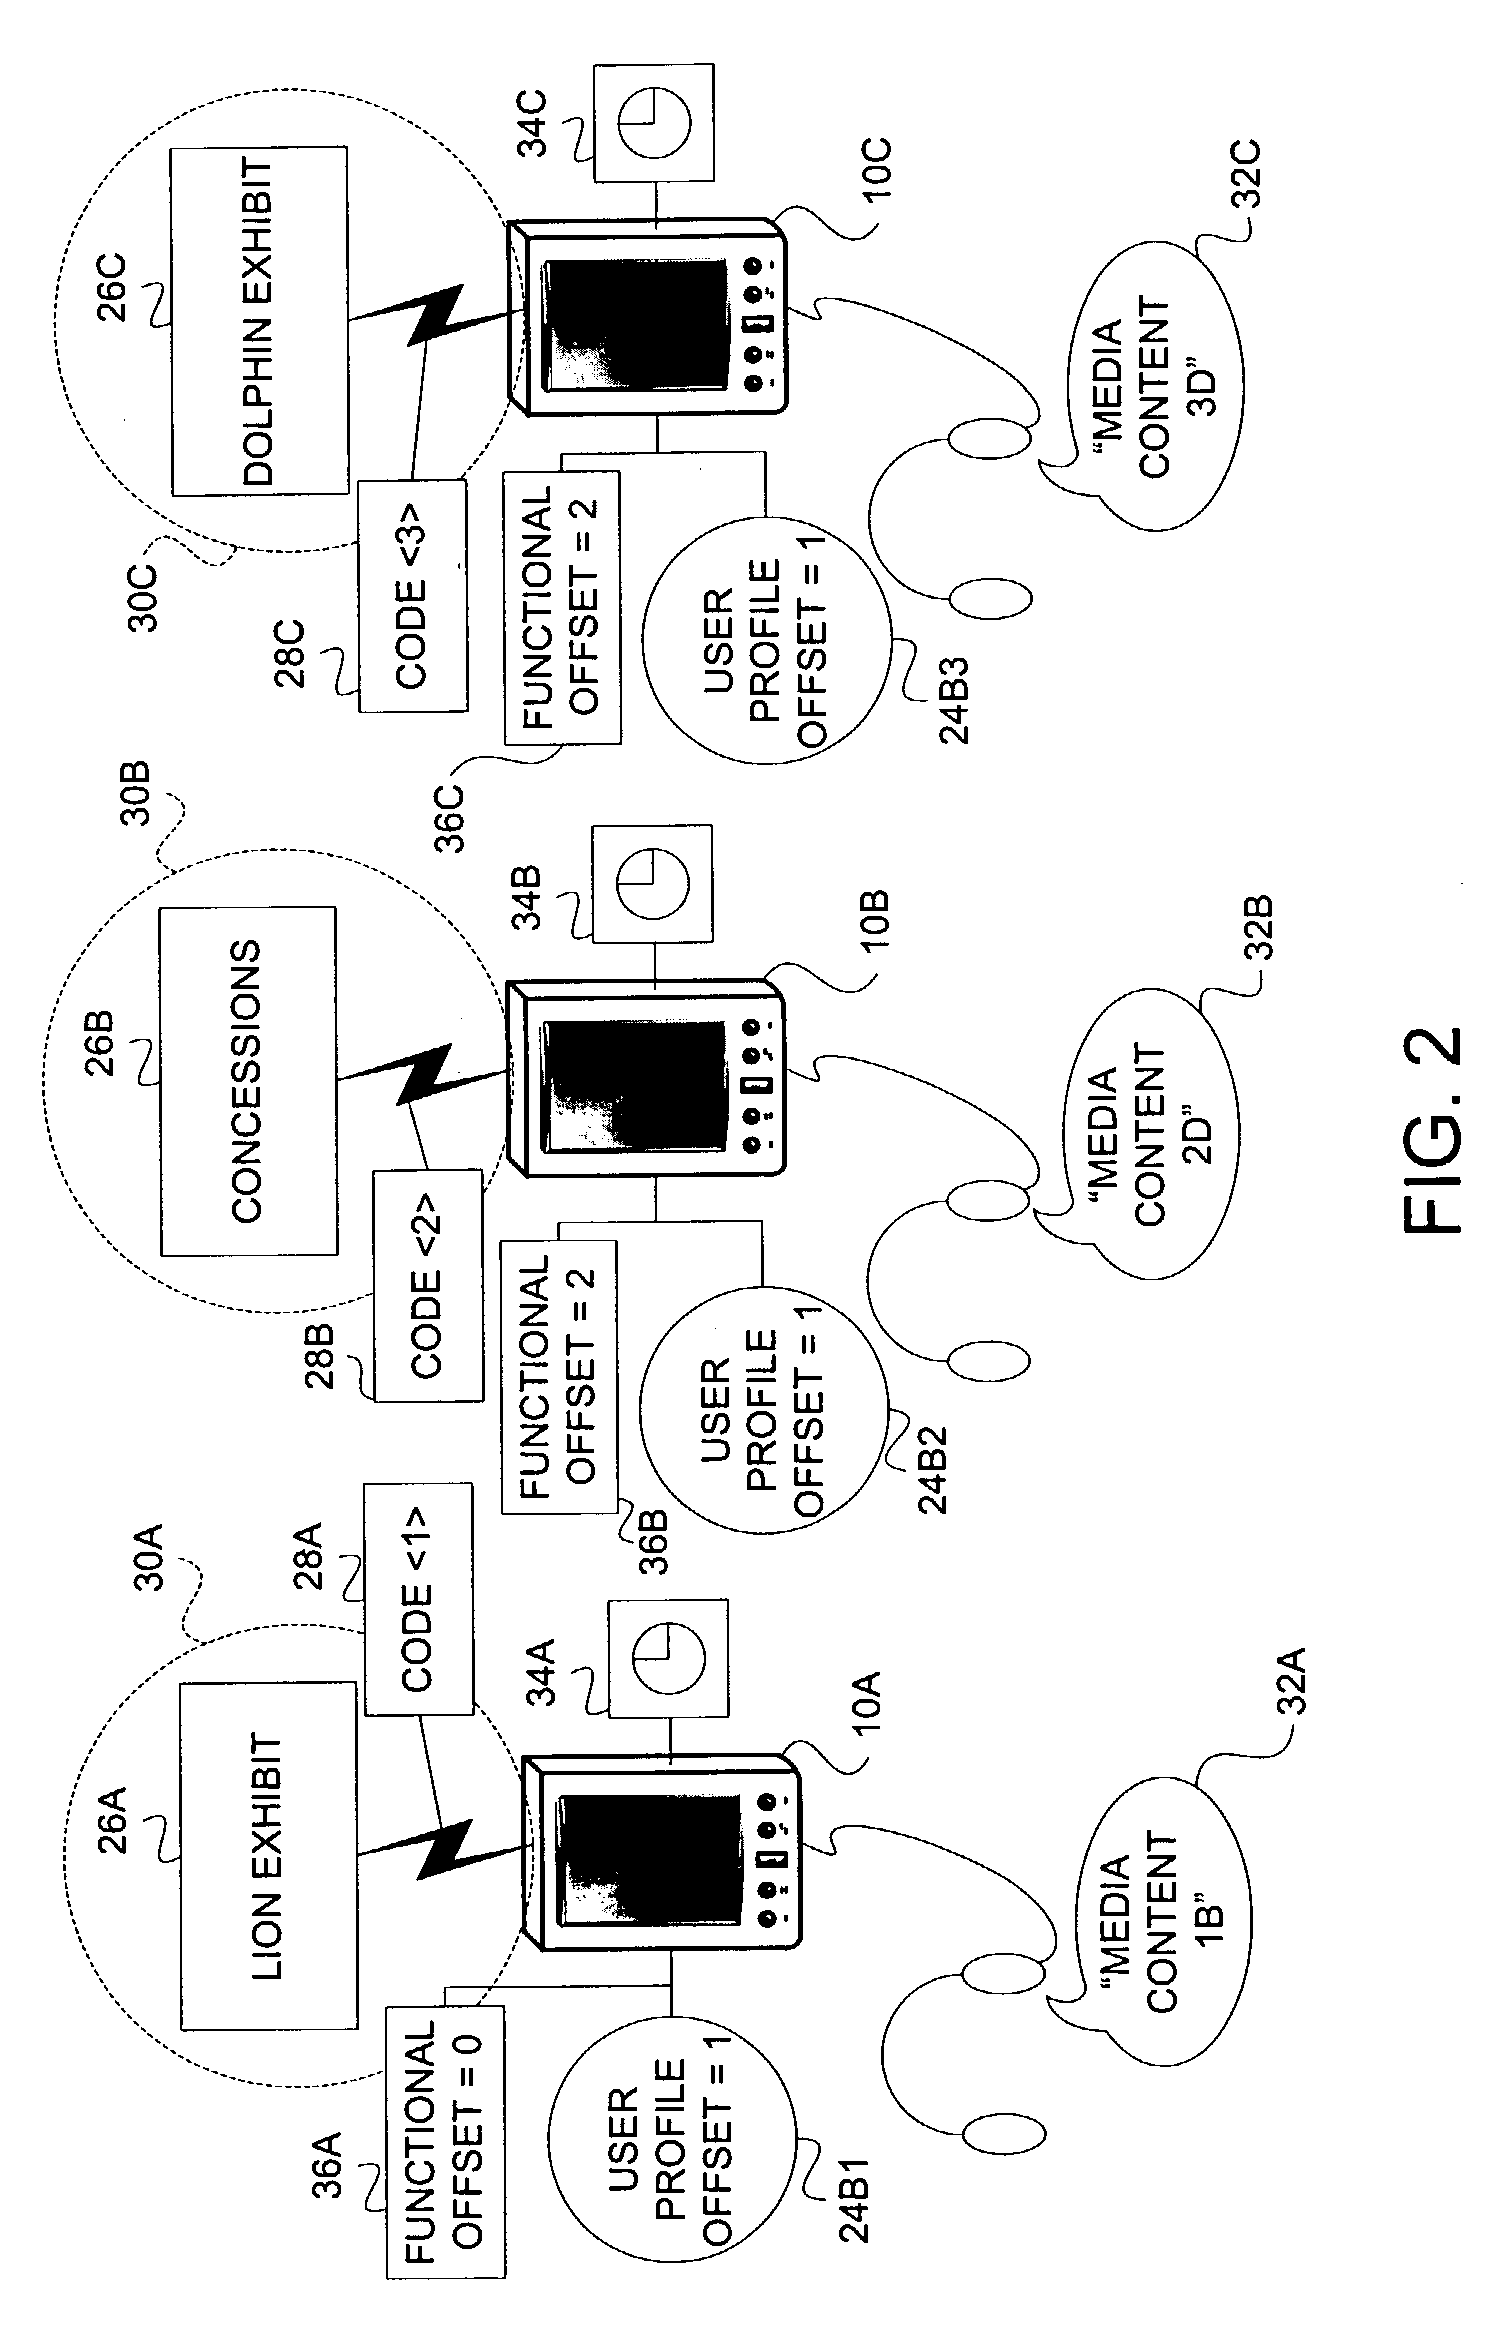 System and method of media content distribution employing portable media content distribution device